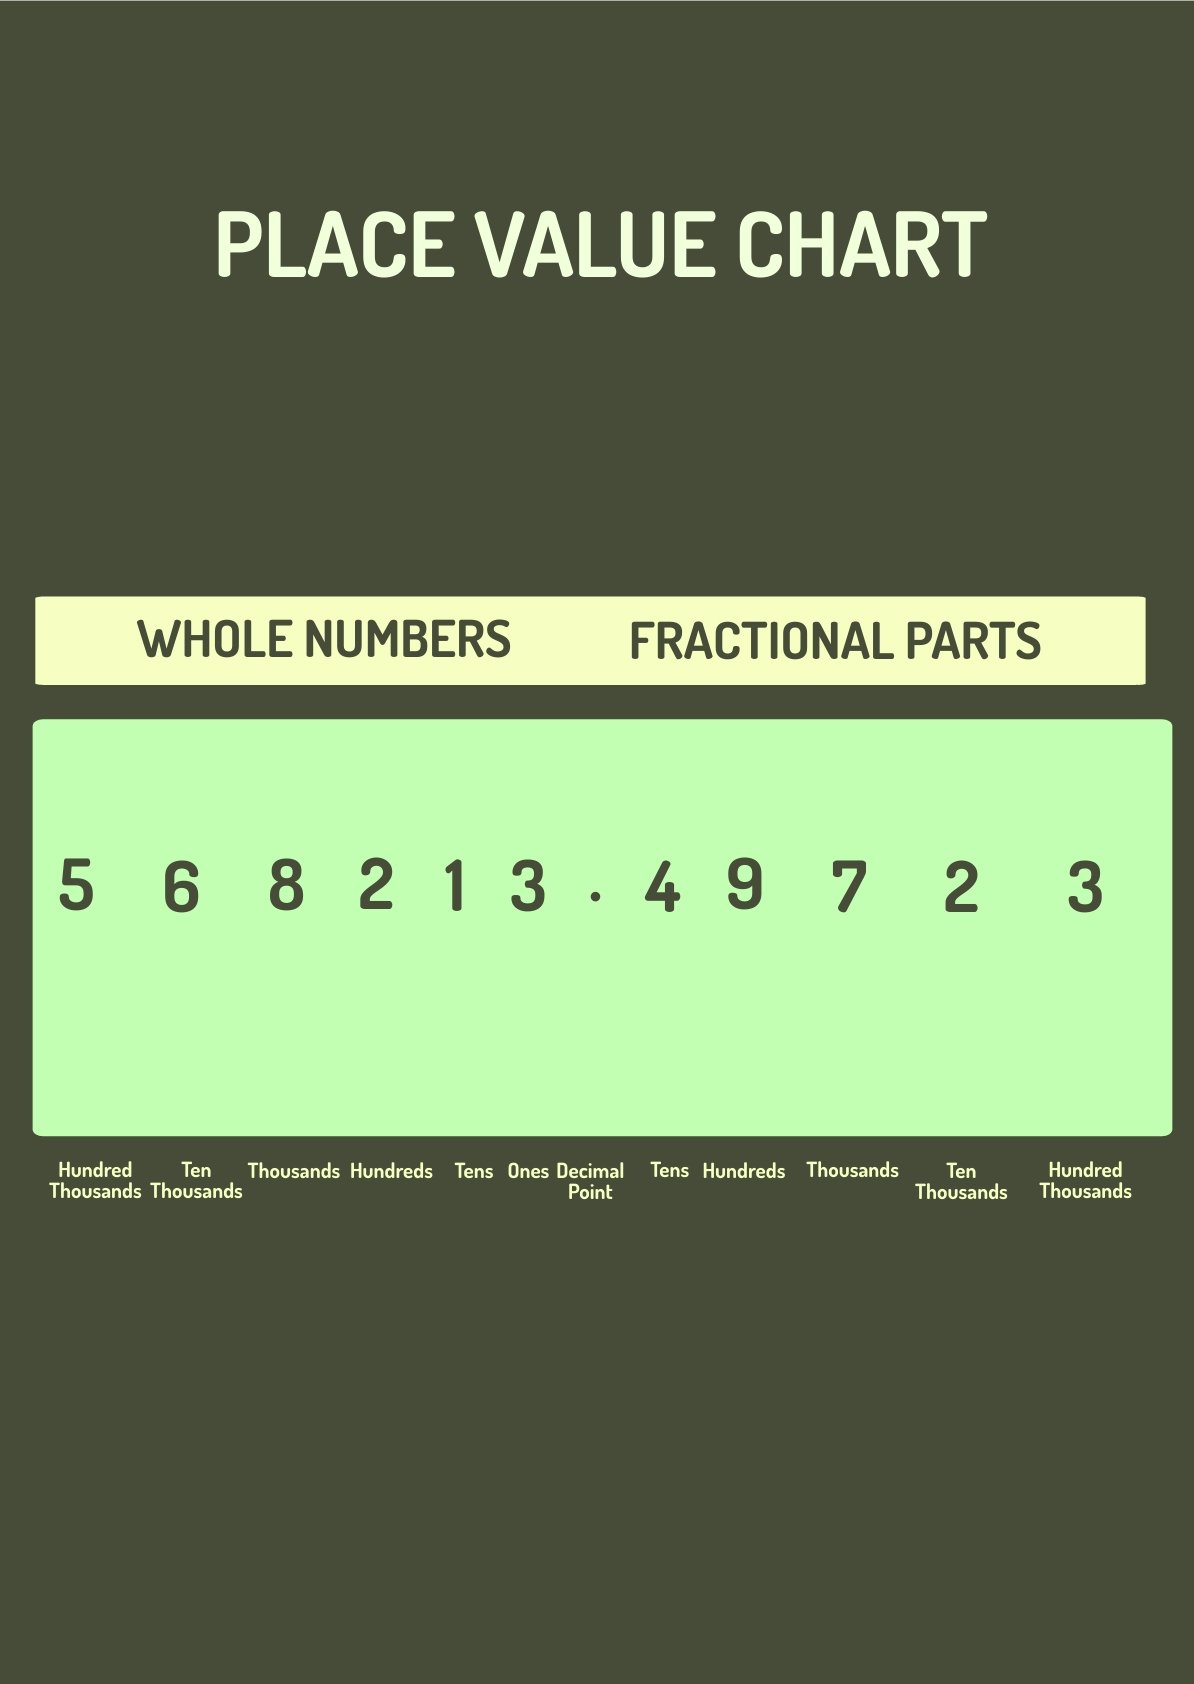 Place Value Chart in PDF, Illustrator